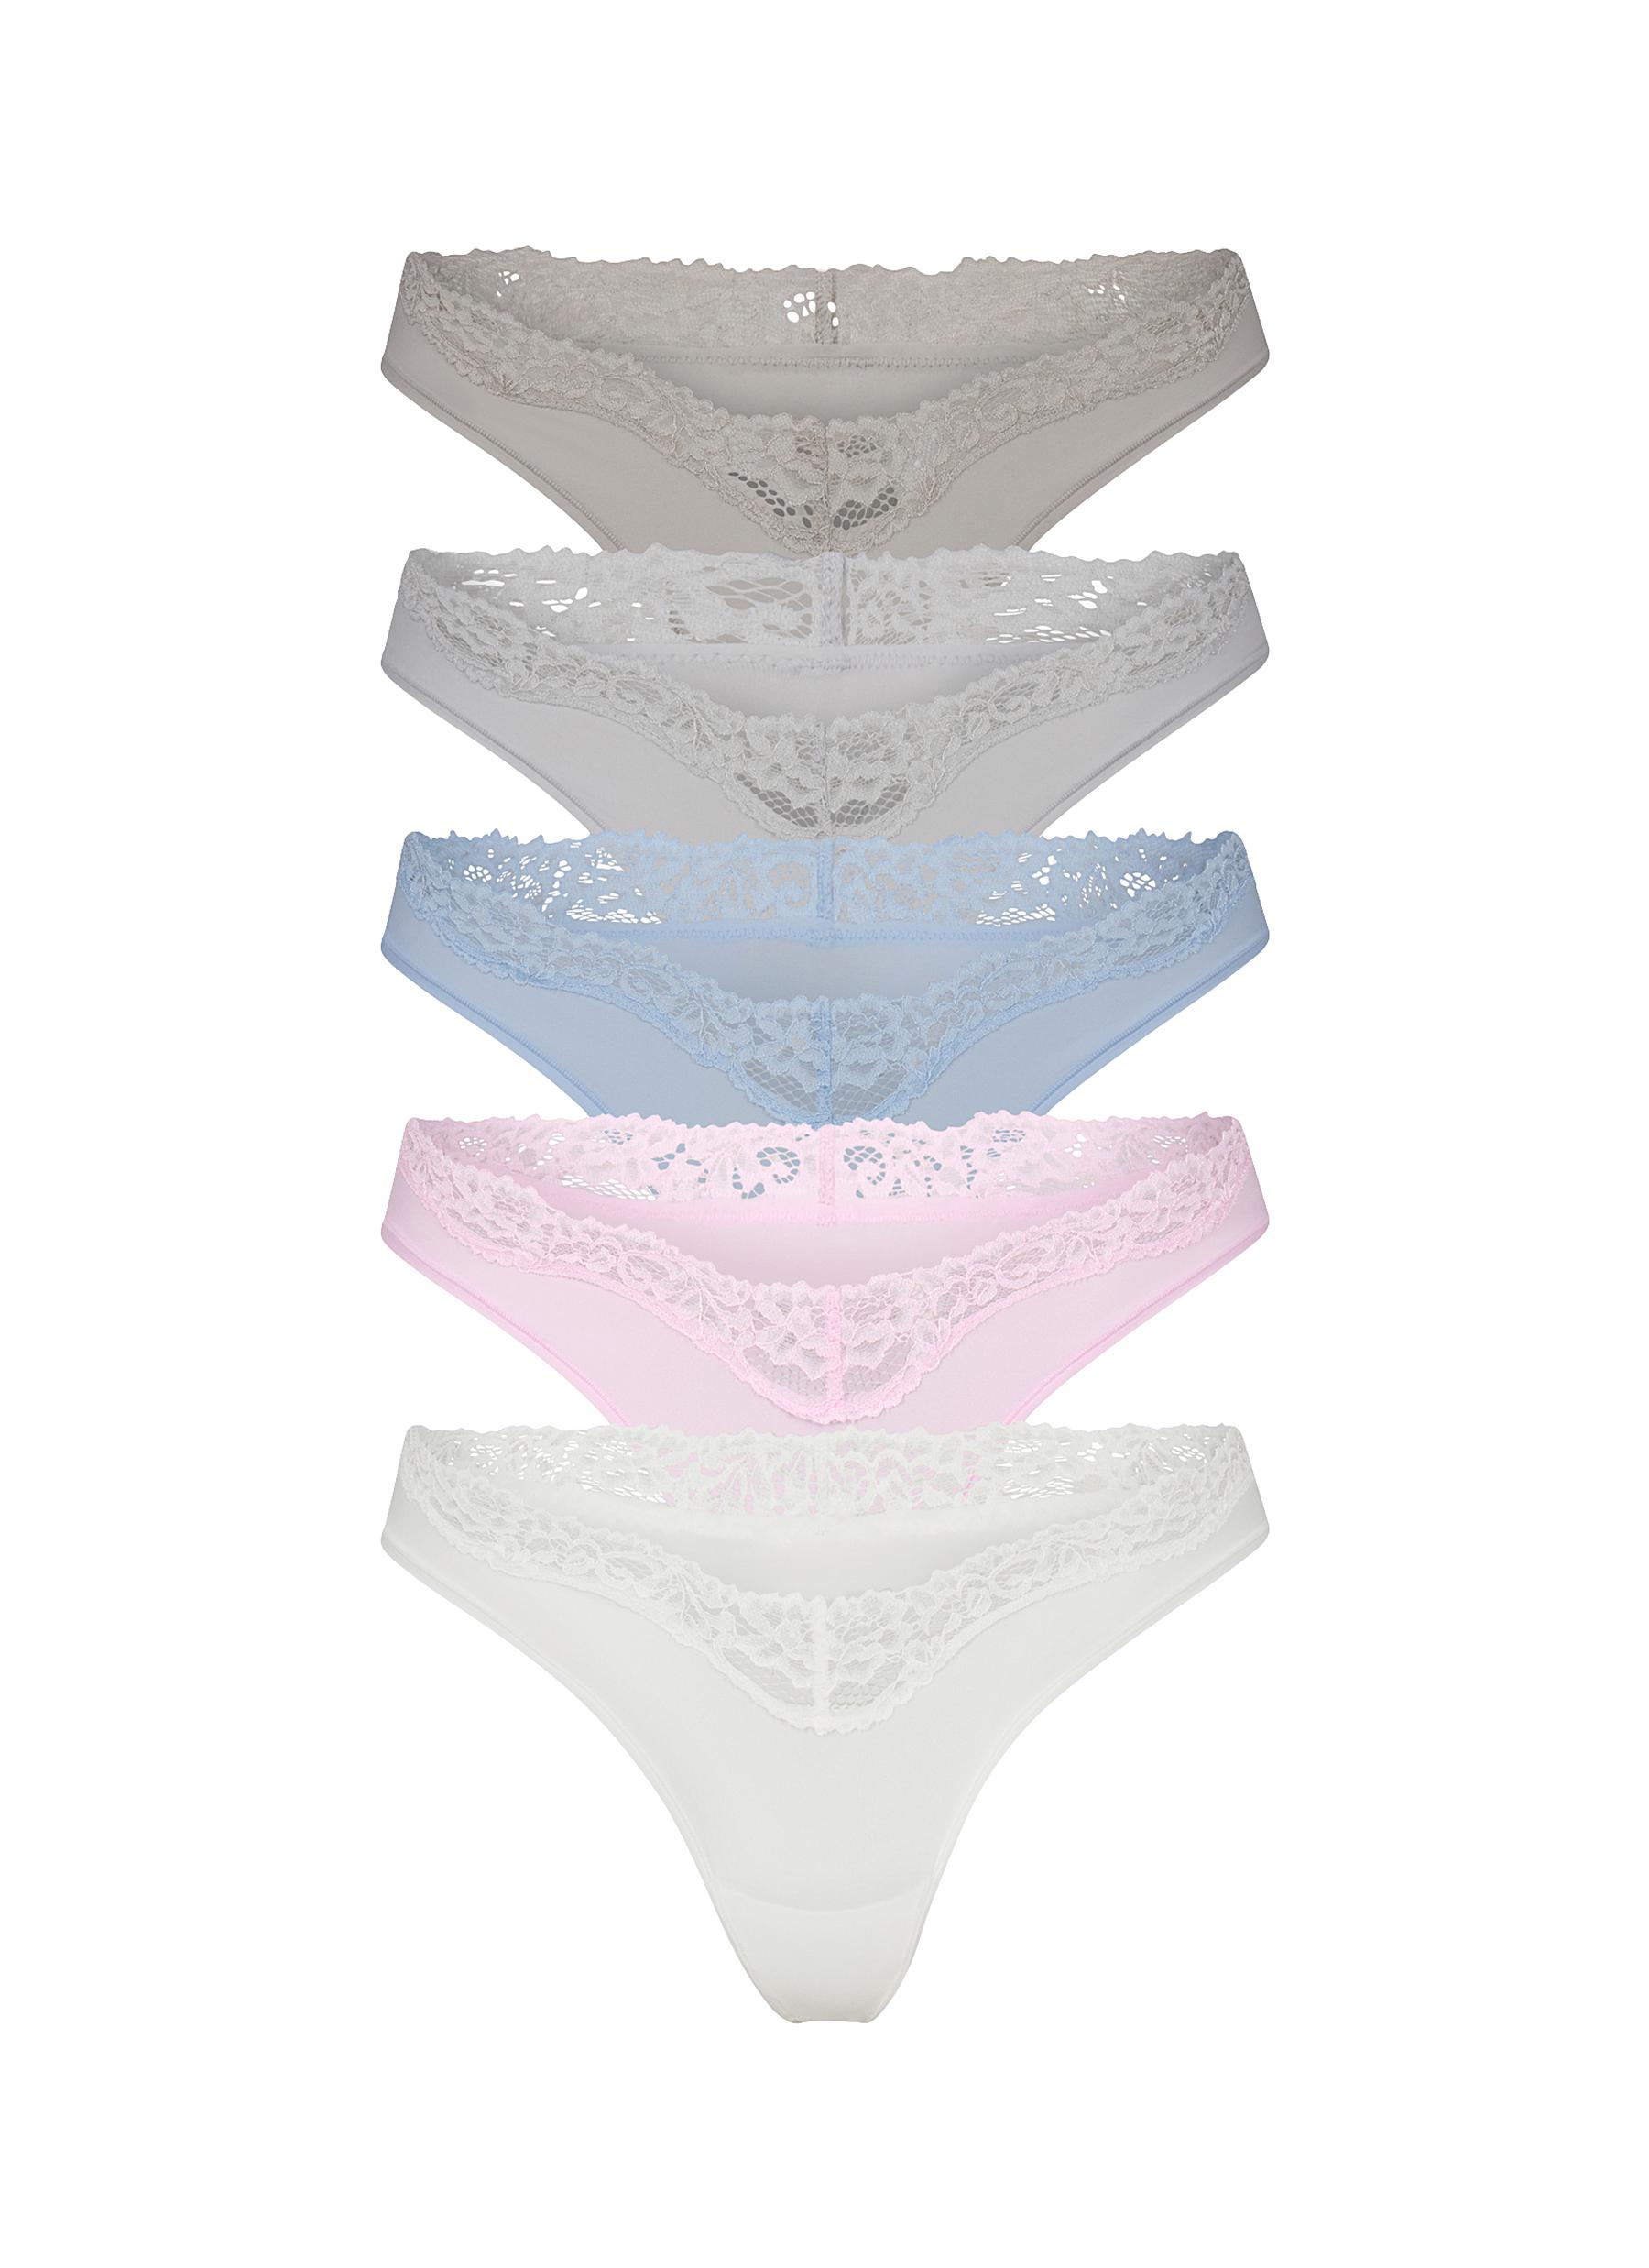 SKIMS, Fits Everybody Lace Dipped Thong Pack — Set of 5, Women